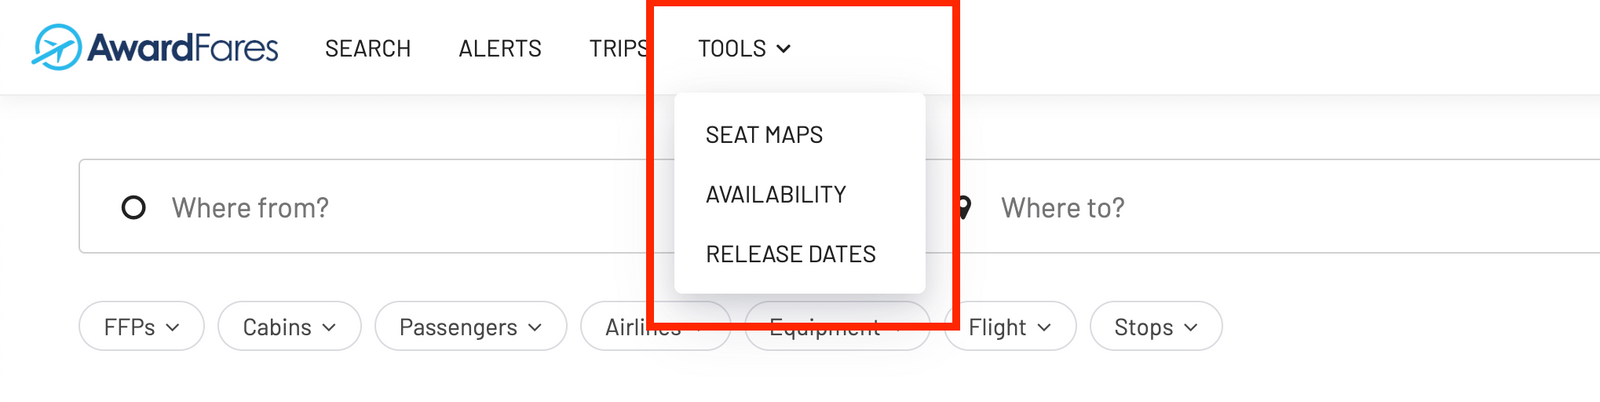 AwardFares new features May 2022 - Seat Map Lookup Tool